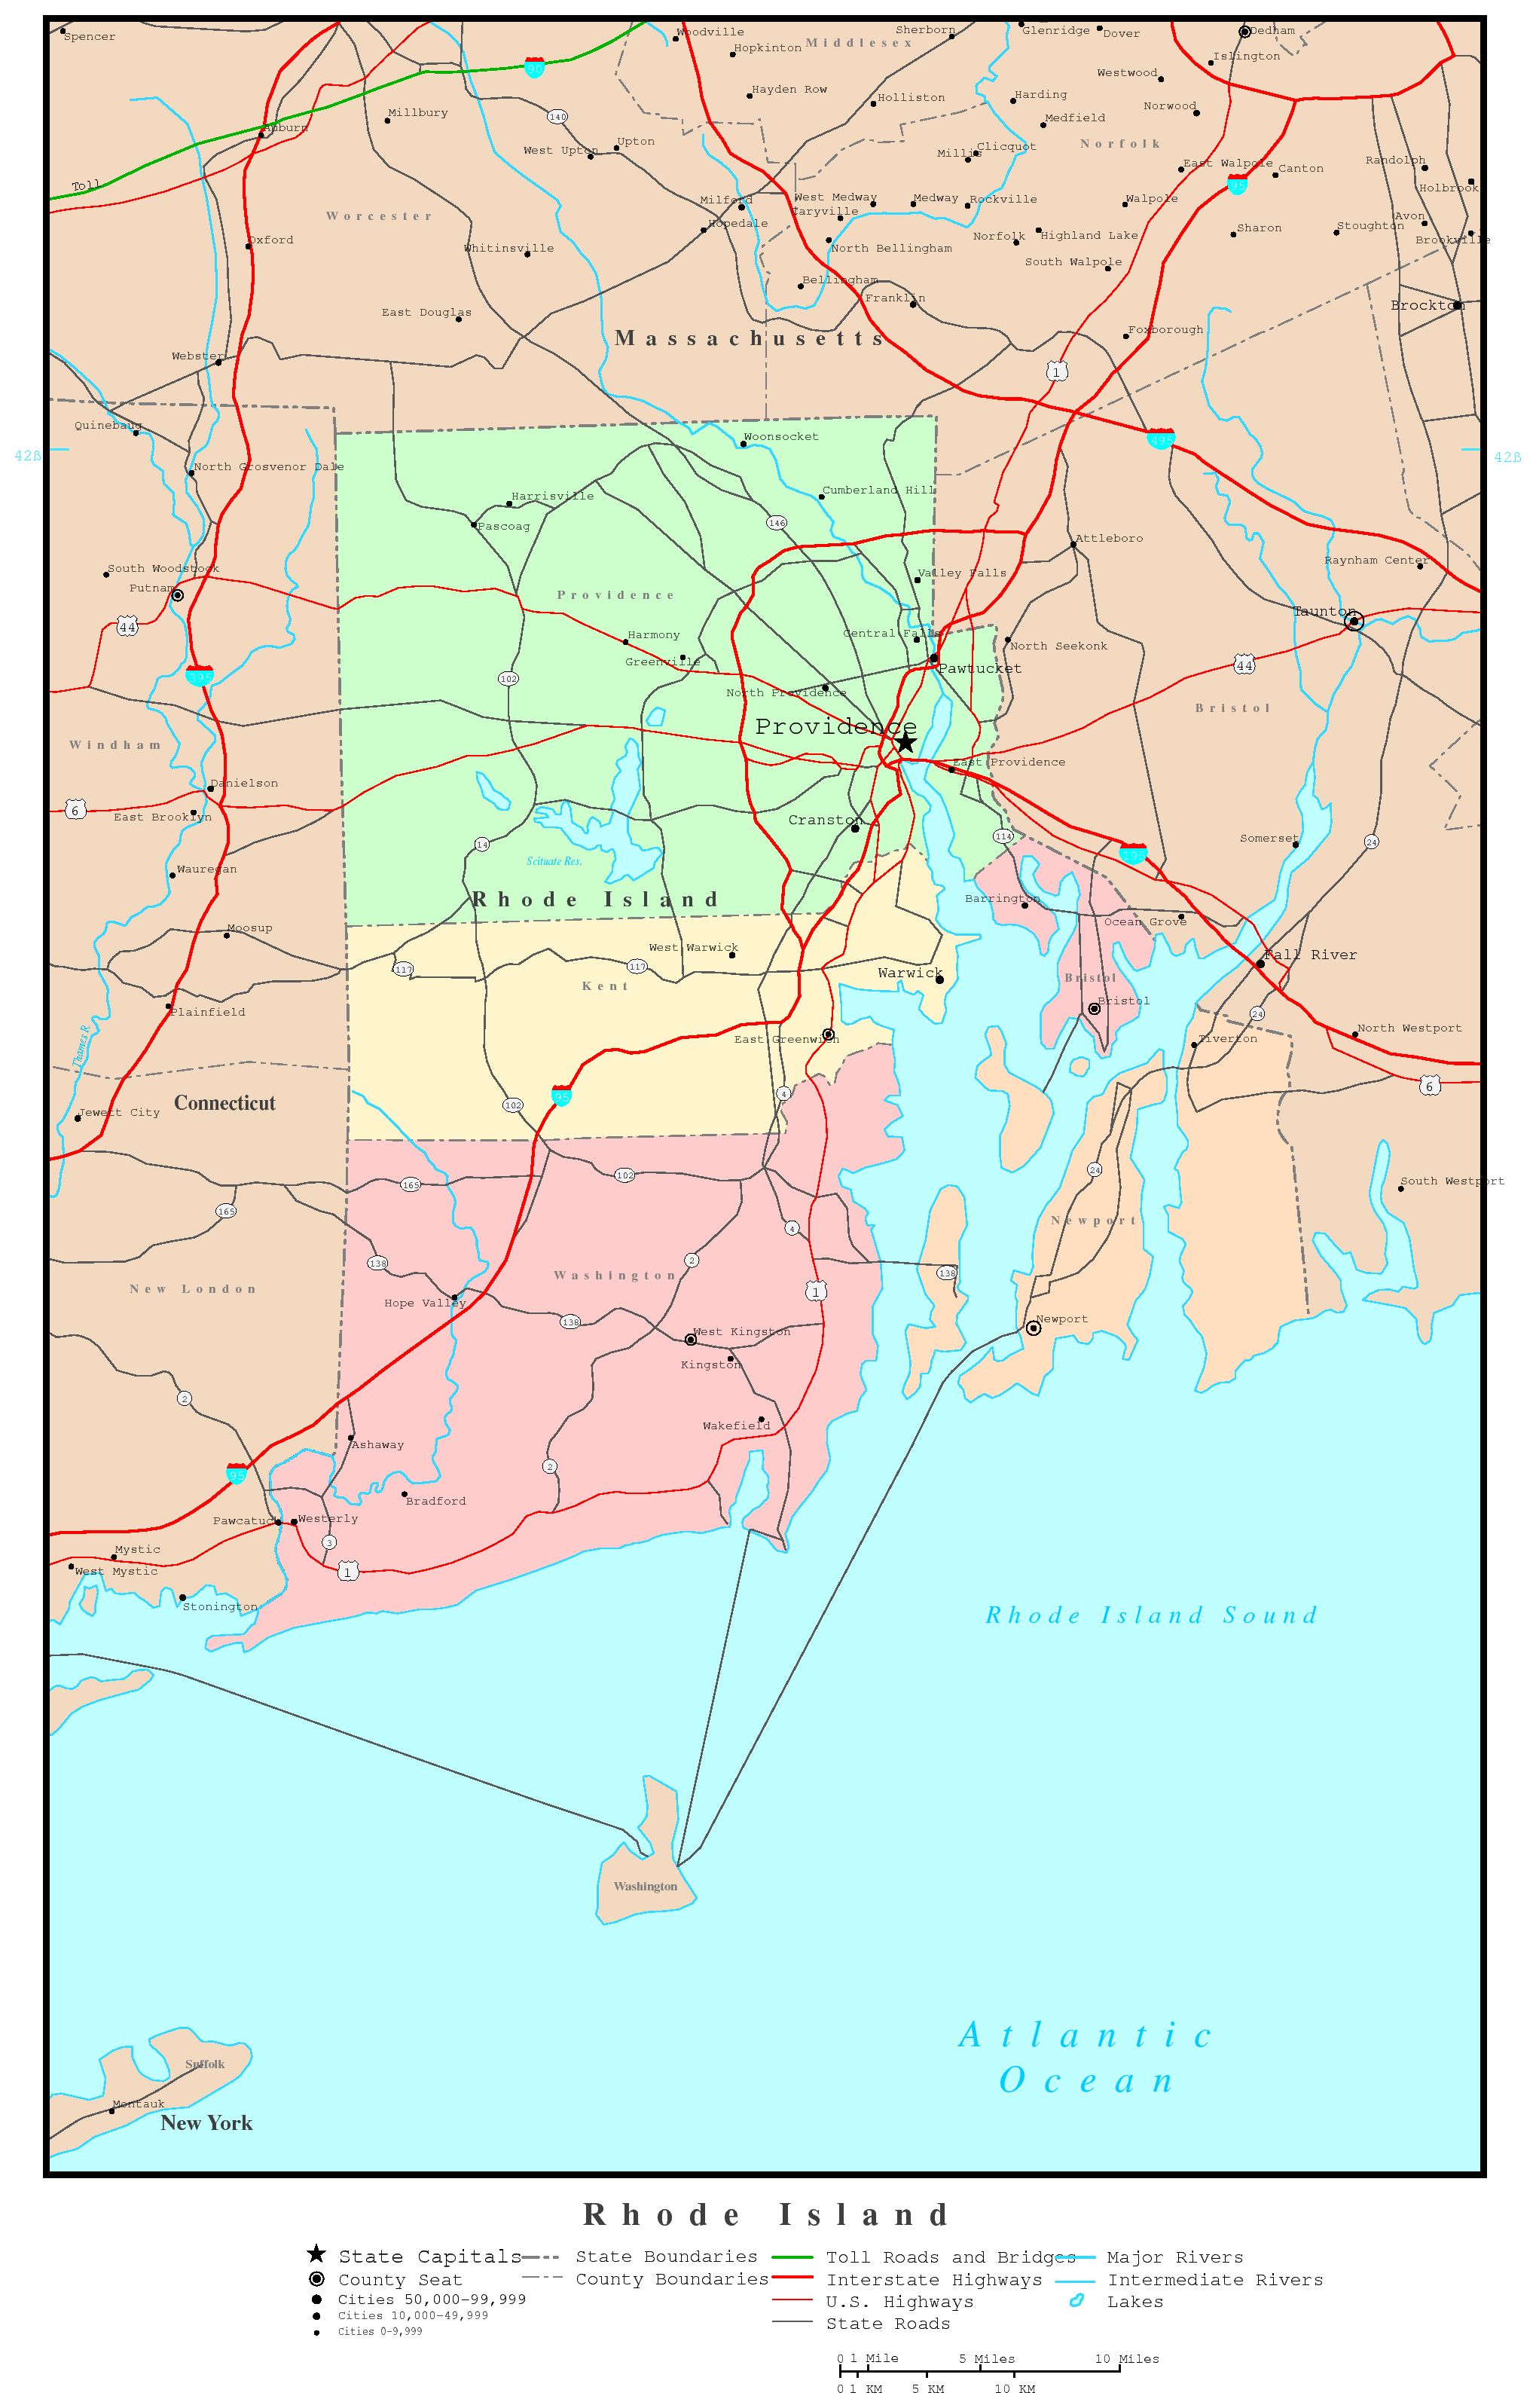 Download this Rhode Island Political Map picture